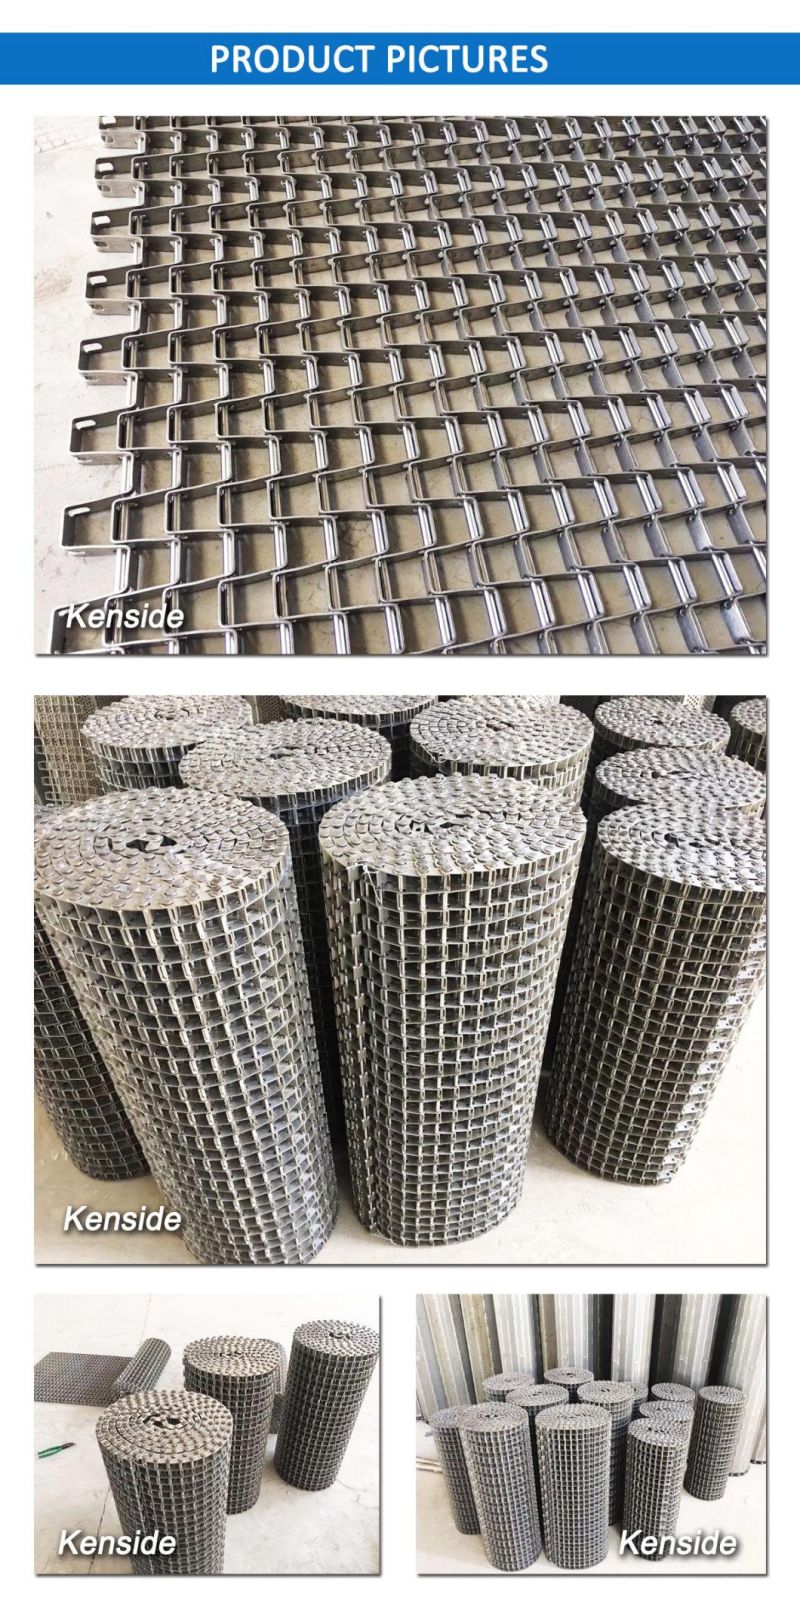 Stainless Steel Honeycomb Conveyor Belt for Food Processing, Freezing, Baking, Drying